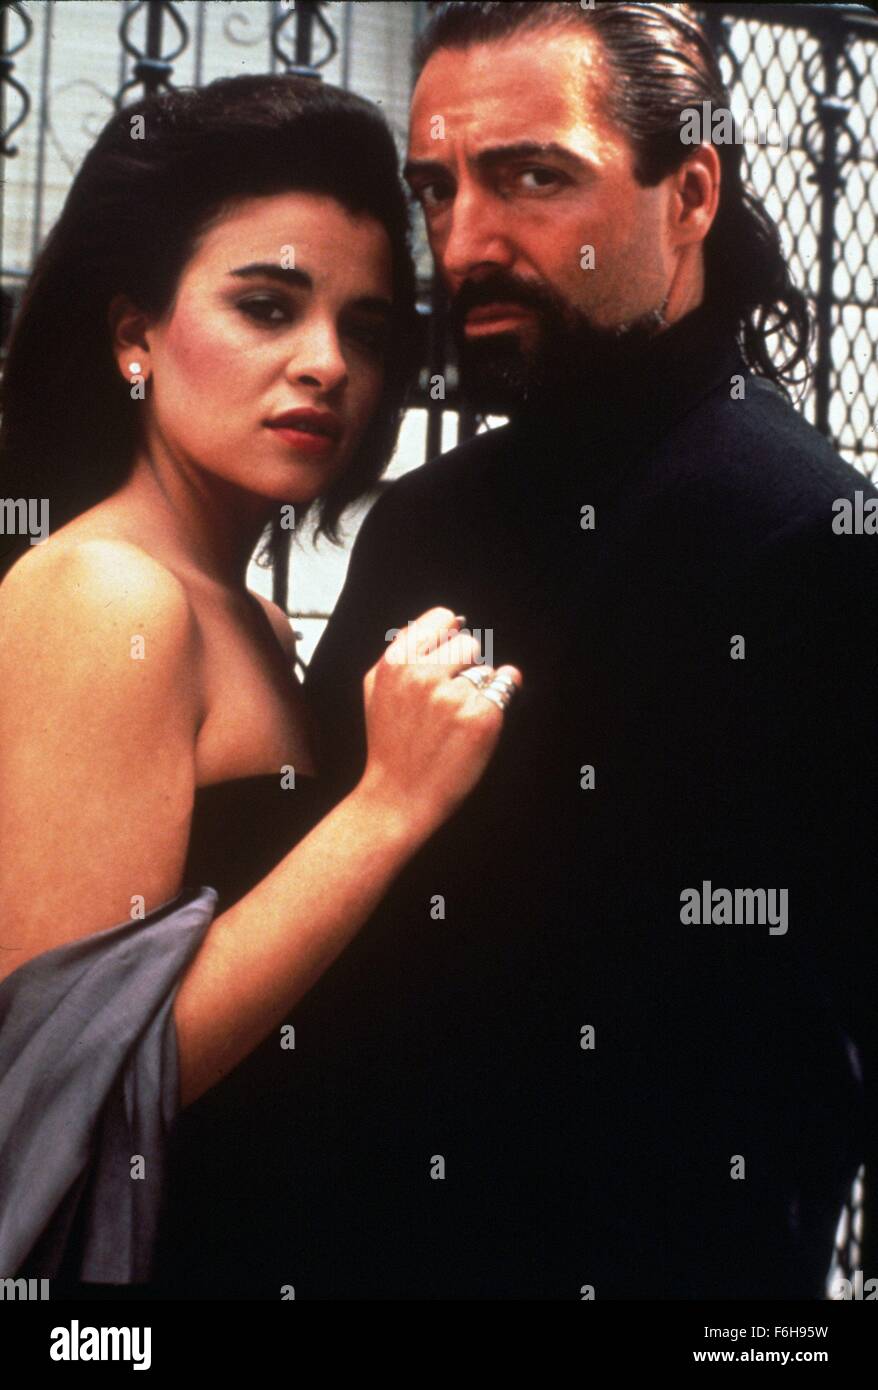 RELEASE DATE: April 27, 1990   MOVIE TITLE: Q & A / Q and A  STUDIO: TriStar Pictures   DIRECTOR: Sidney Lumet   PLOT: A young district attorney seeking to prove a case against a corrupt police detective encounters a former lover and her new protector, a crime boss who refuse to help him in this gritty crime film.   PICTURED: ARMAND ASSANTE as Roberto 'Bobby Tex' Texador and JENNY LUMET as Nancy Bosch / Mrs. Bobby Texador.   (Credit Image: c TriStar Pictures/Entertainment Pictures) Stock Photo